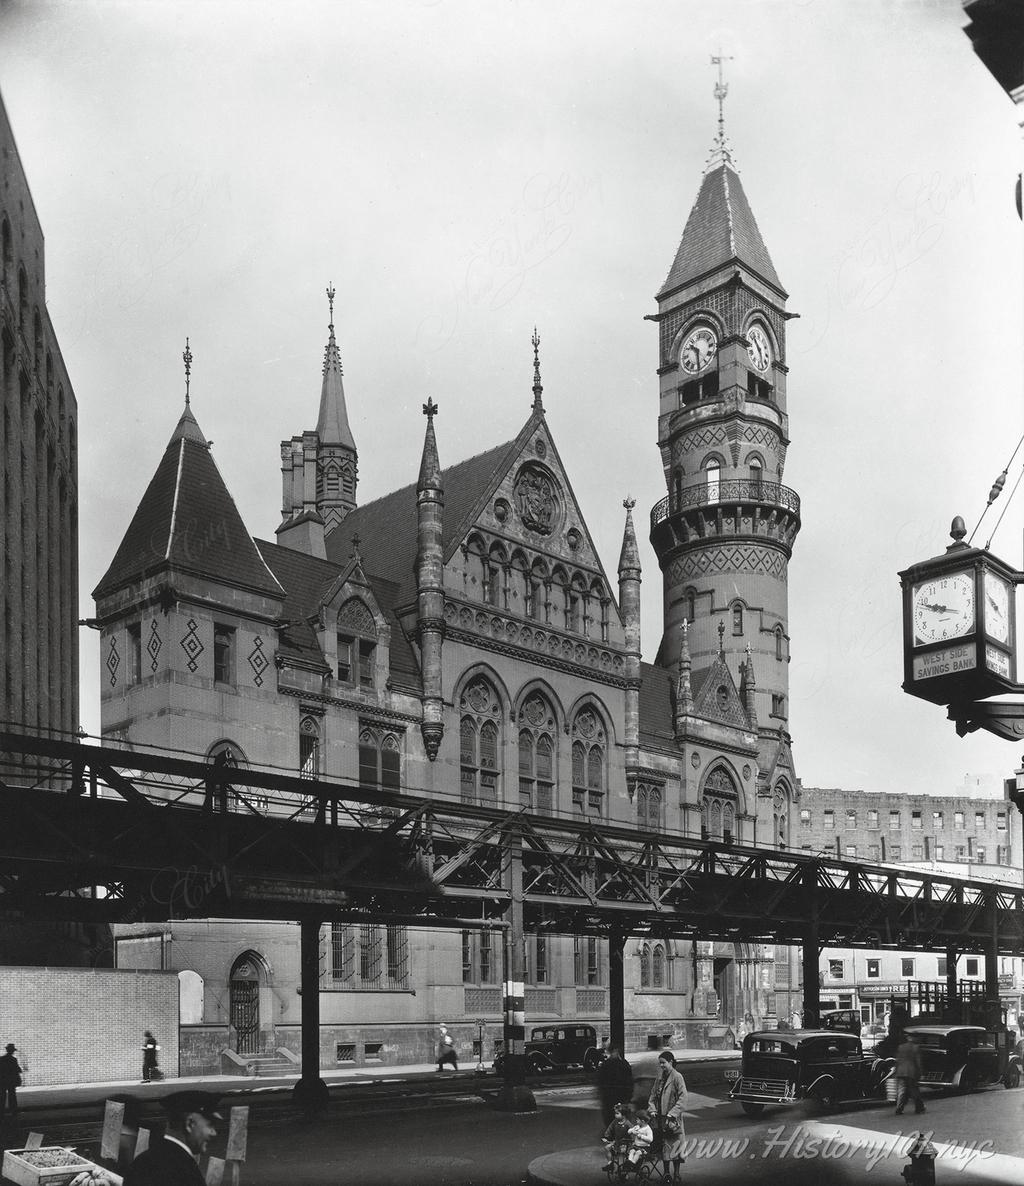 Photograph of Jefferson Market Court on Sixth Avenue and West 10th Street.